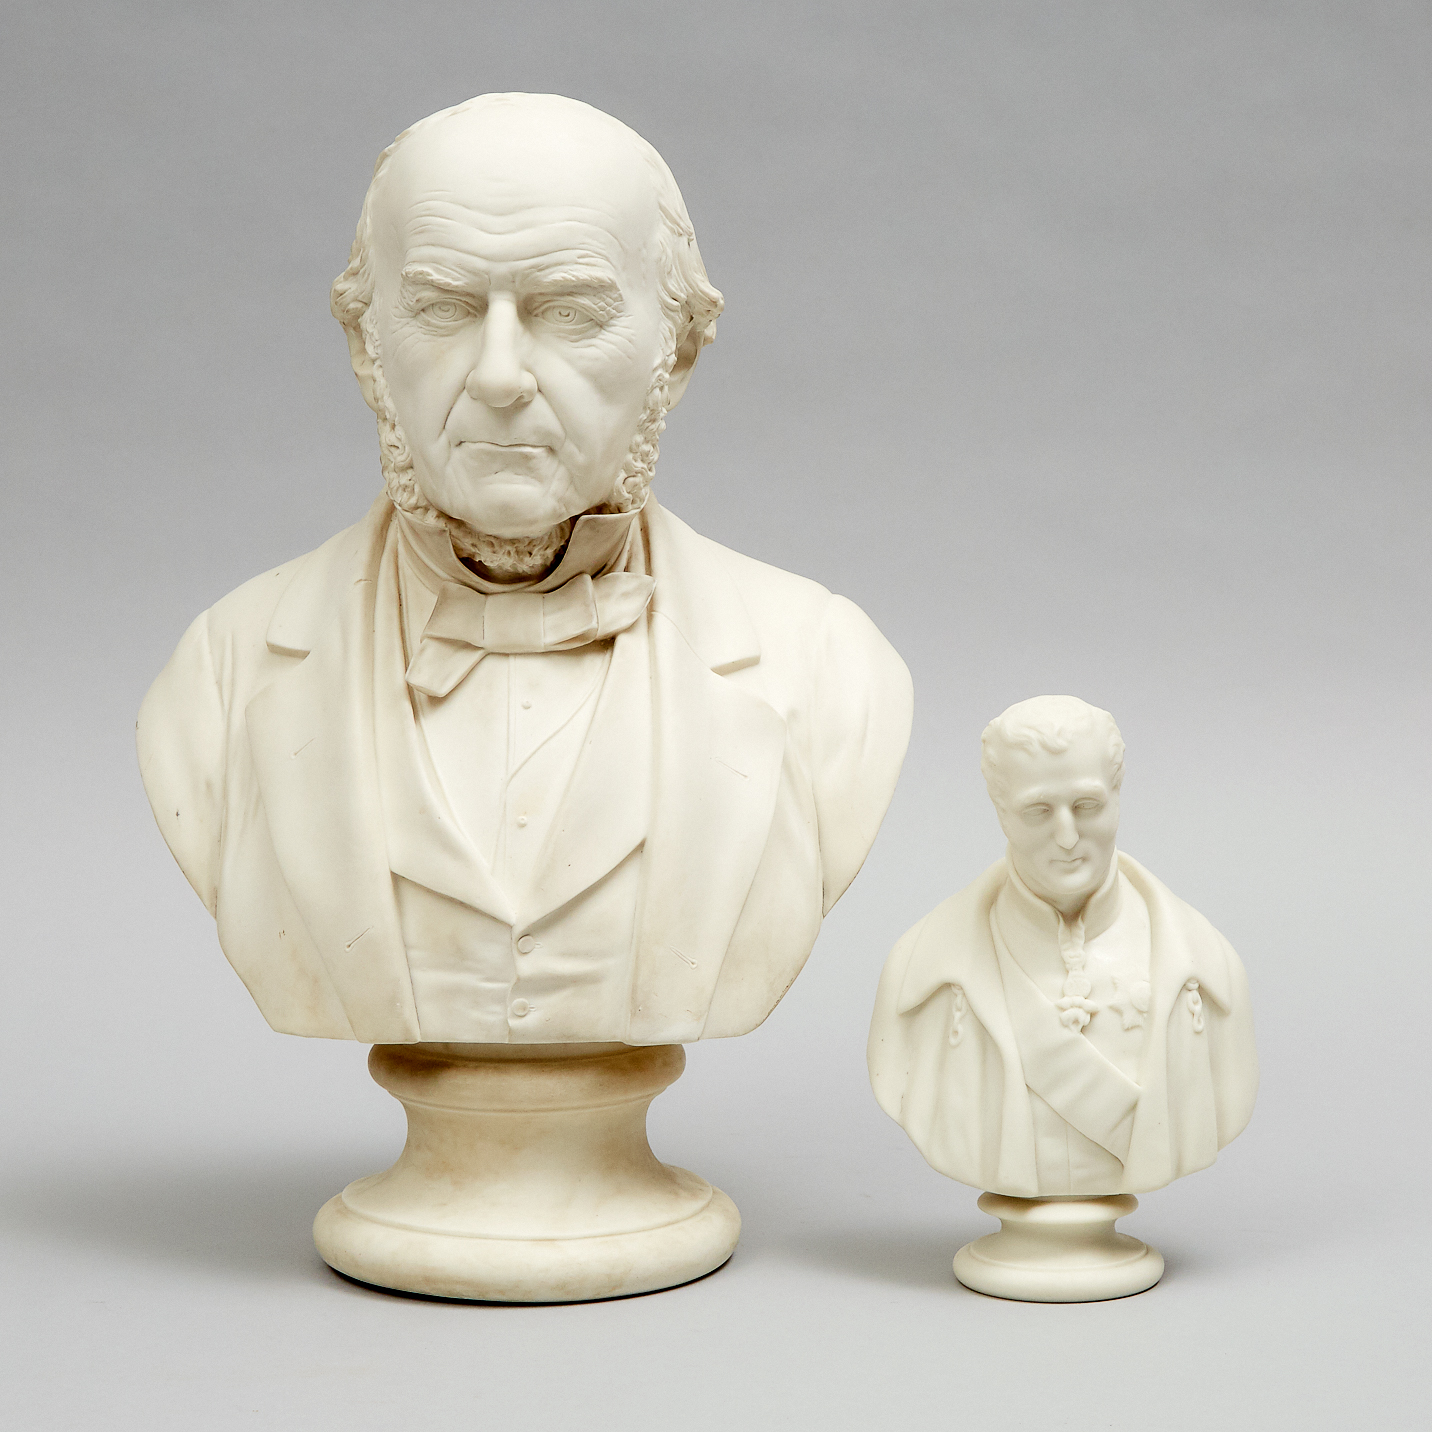 Two Victorian Parian Busts: William Ewart Gladstone, M.P. by Robinson and Leadbeater, and Count Alfred d'Orsay by Copeland, c.1890